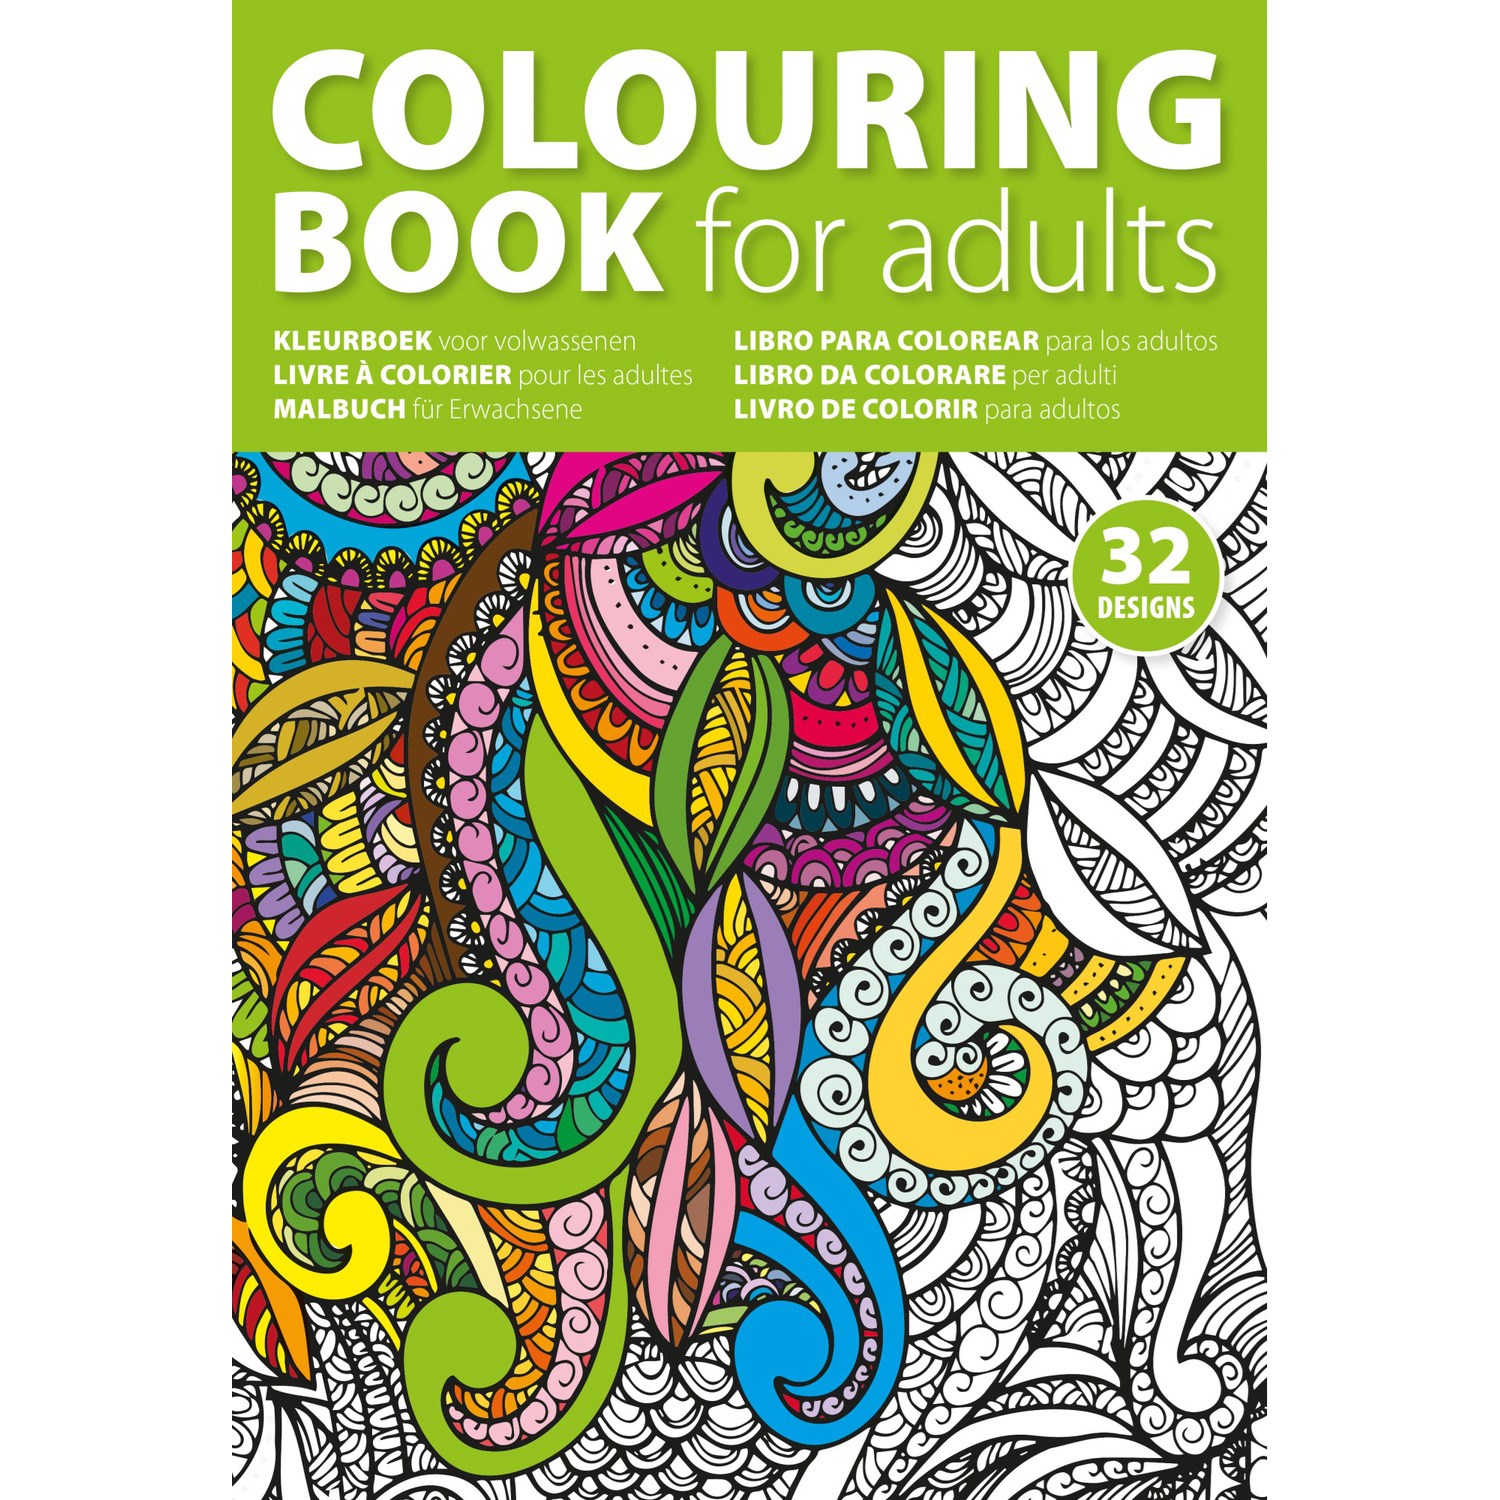 Coloring-book-1 20 Unexpected and Creative Gift Ideas for Best Friends